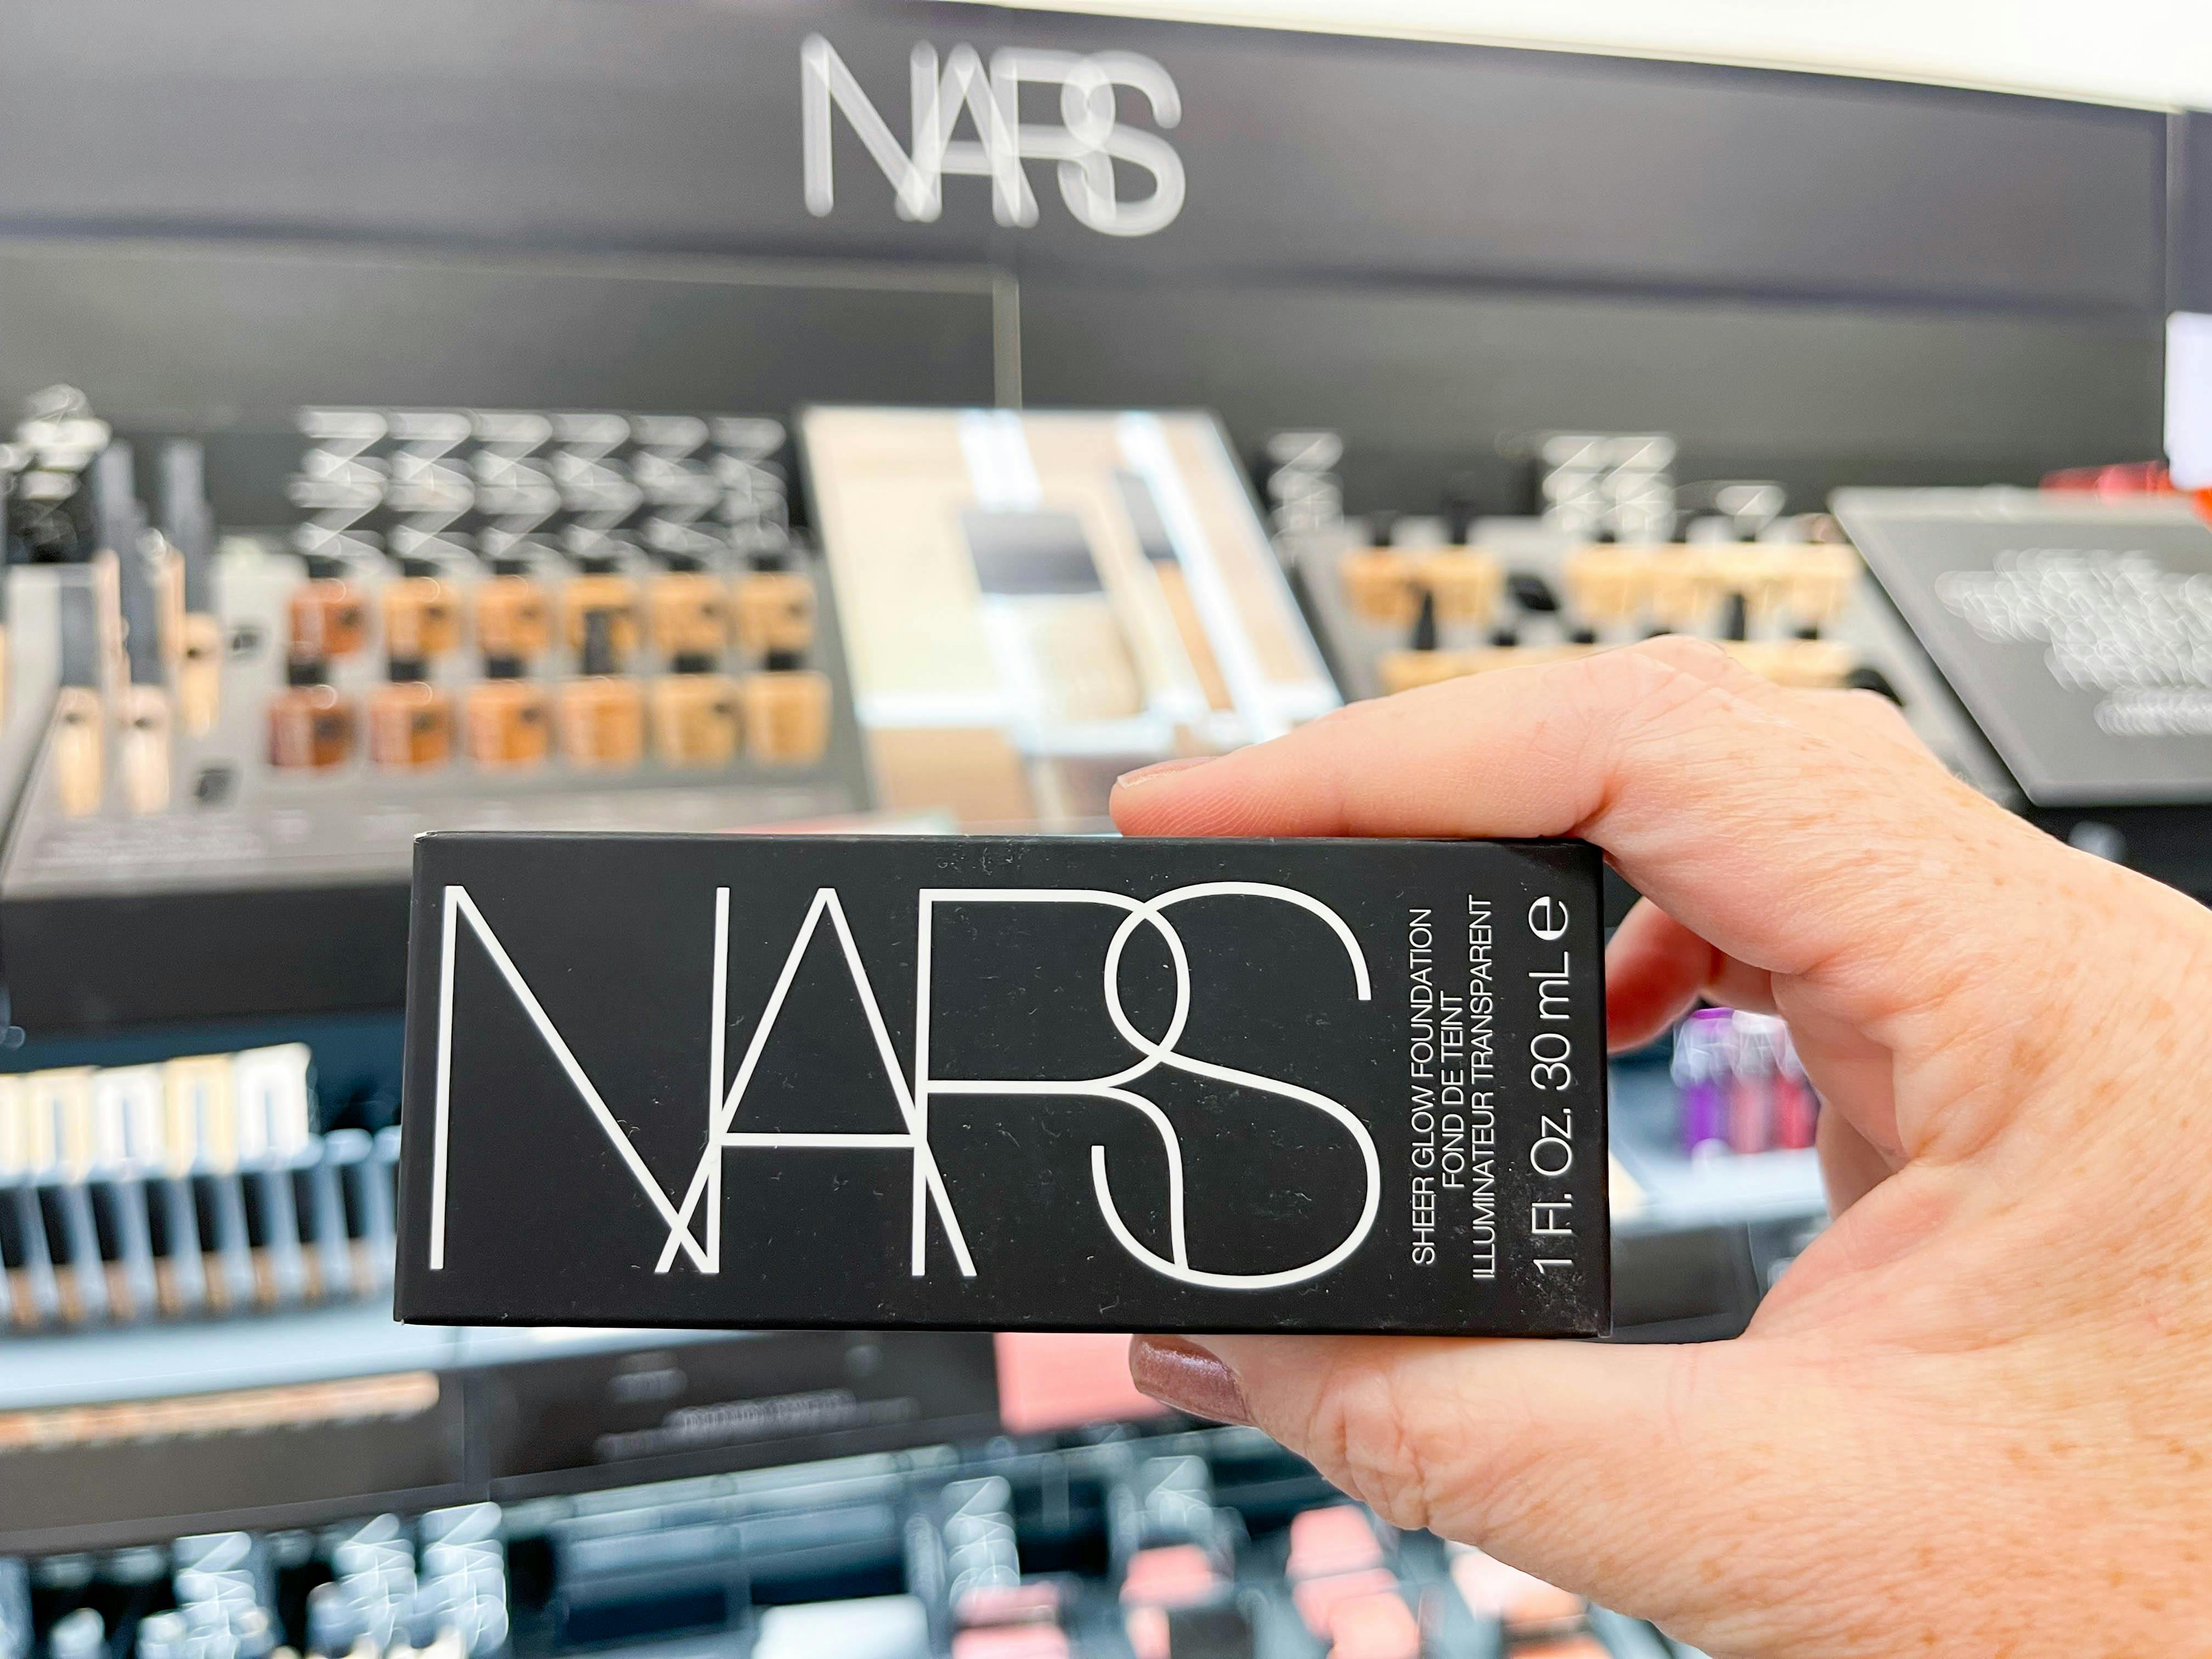 A person holding a box of nars foundation in front of the display in a Sephora store.